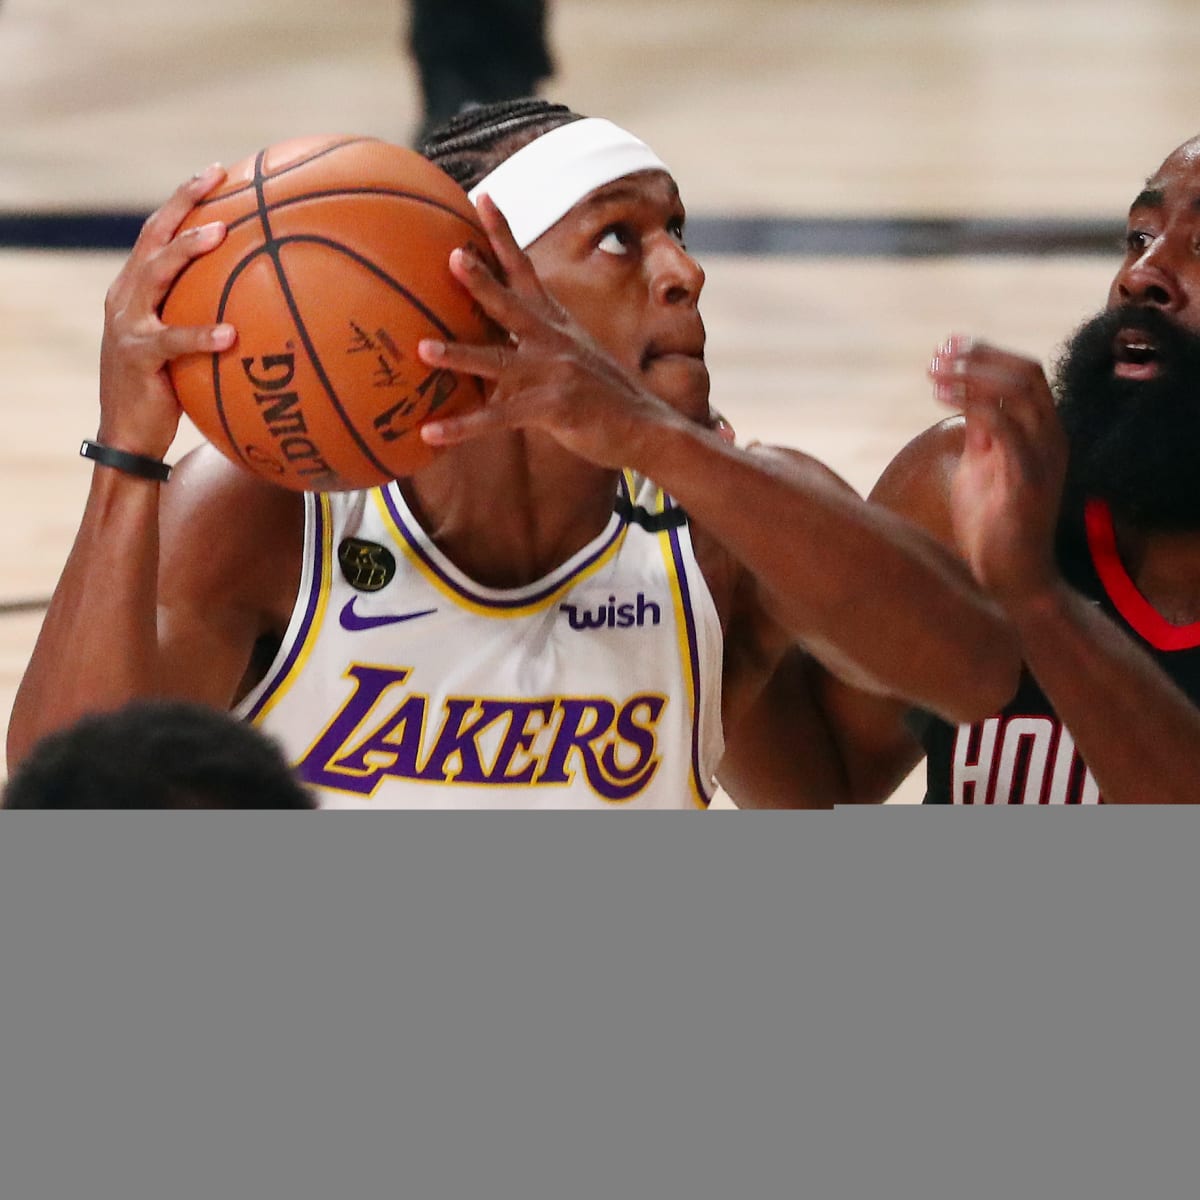 Rondo, a champ in Boston, on brink of getting a Lakers ring – KGET 17